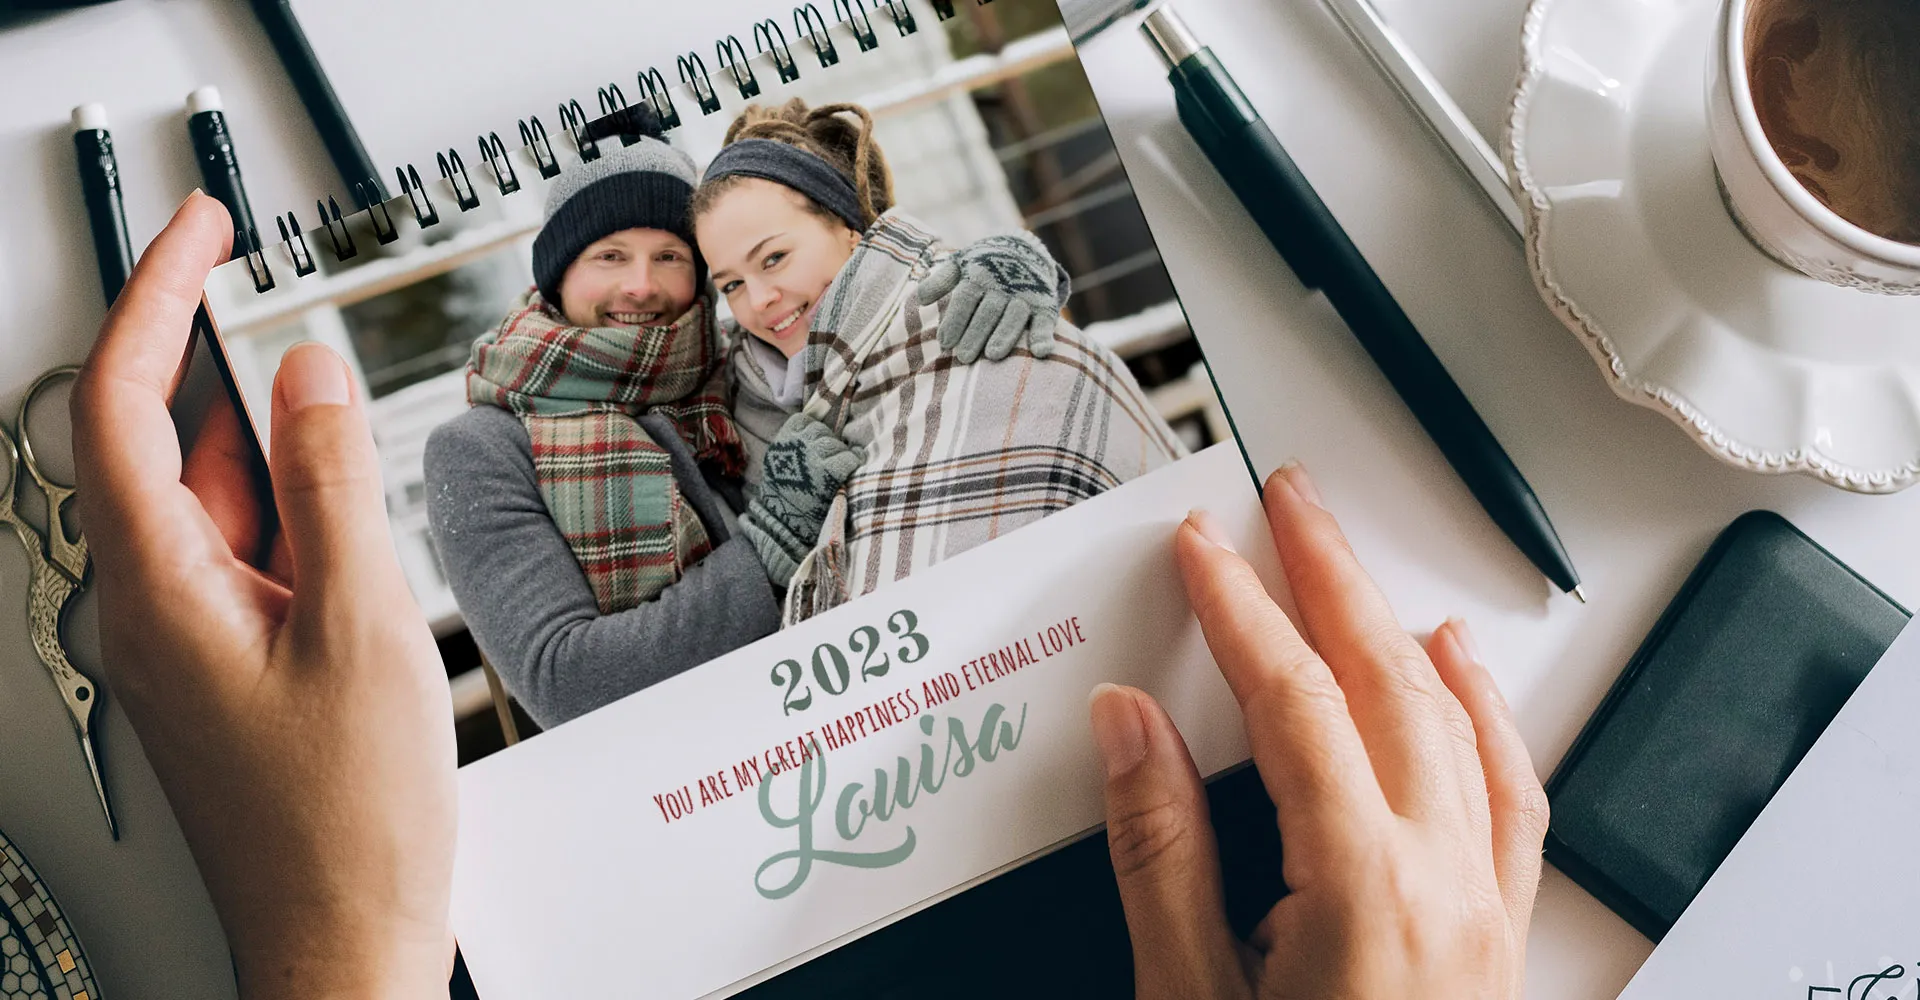 Selling personalized calendars online - what´s important